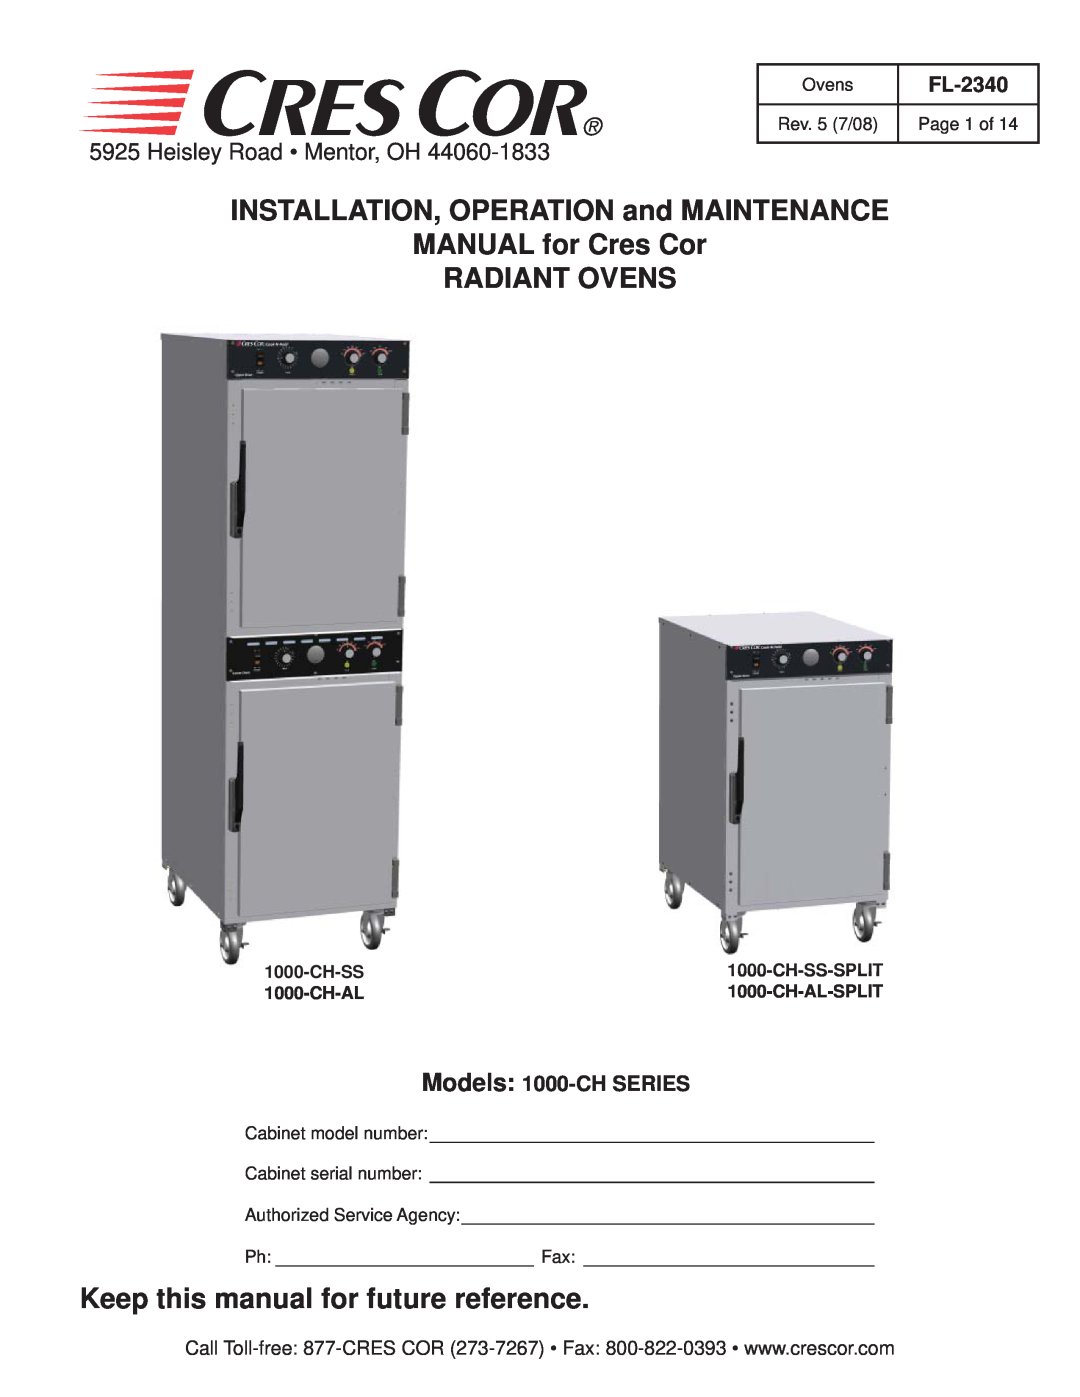 Cres Cor 1000-CH-SS manual INSTALLATION, OPERATION and MAINTENANCE MANUAL for Cres Cor, Radiant Ovens, FL-2340, Ch-Ss 